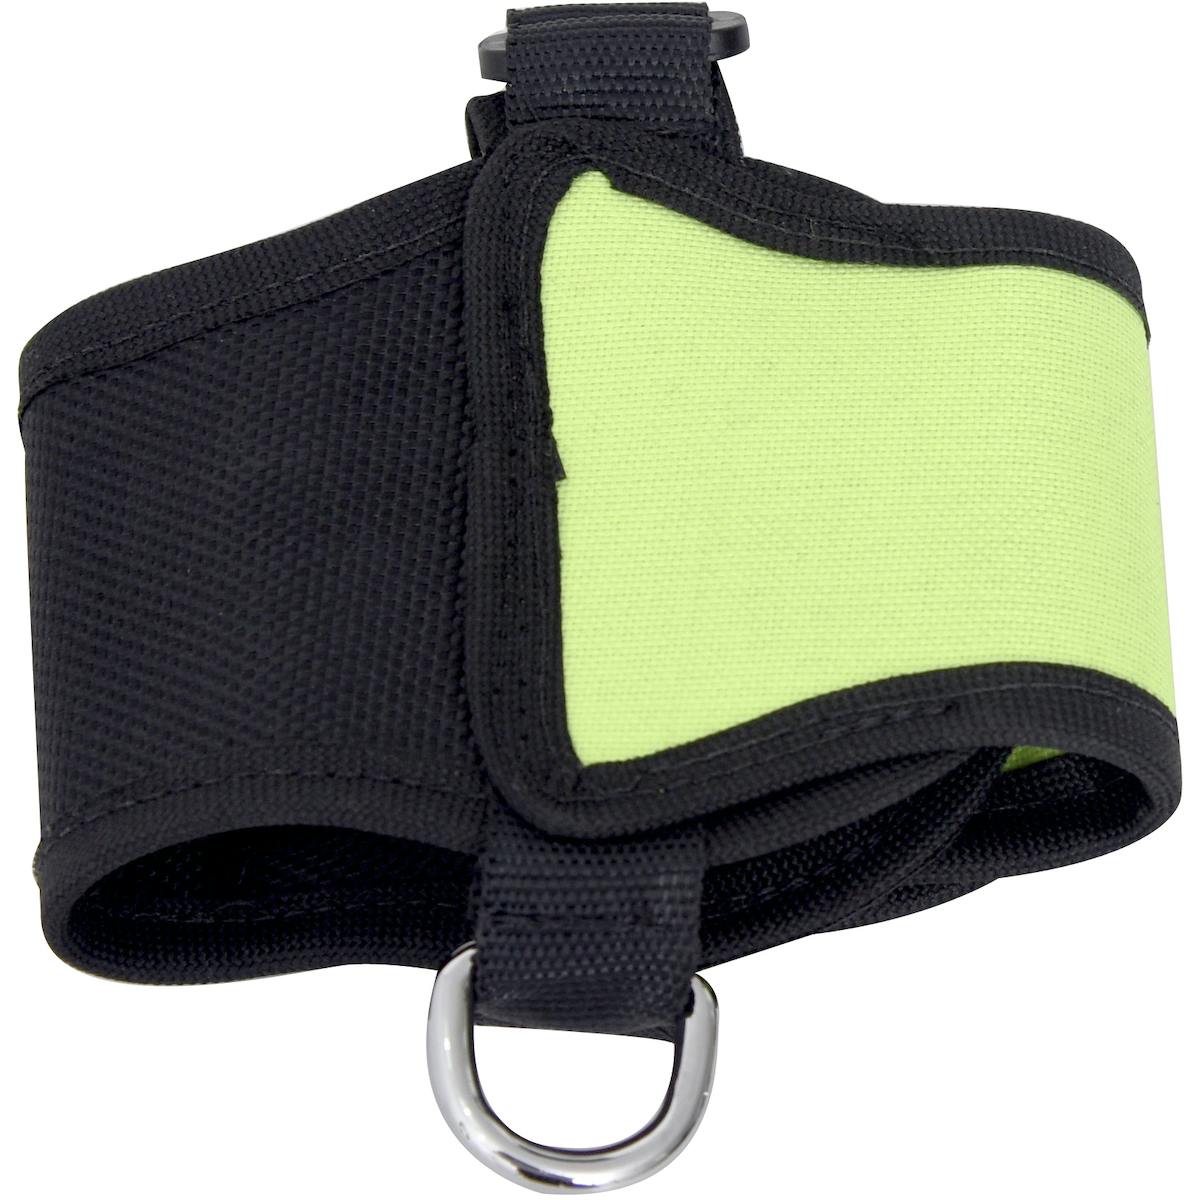 Measuring Tape Pouch - 2 lbs. maximum load limit - Retail Packaged, Lime (533-300301) - OS_1